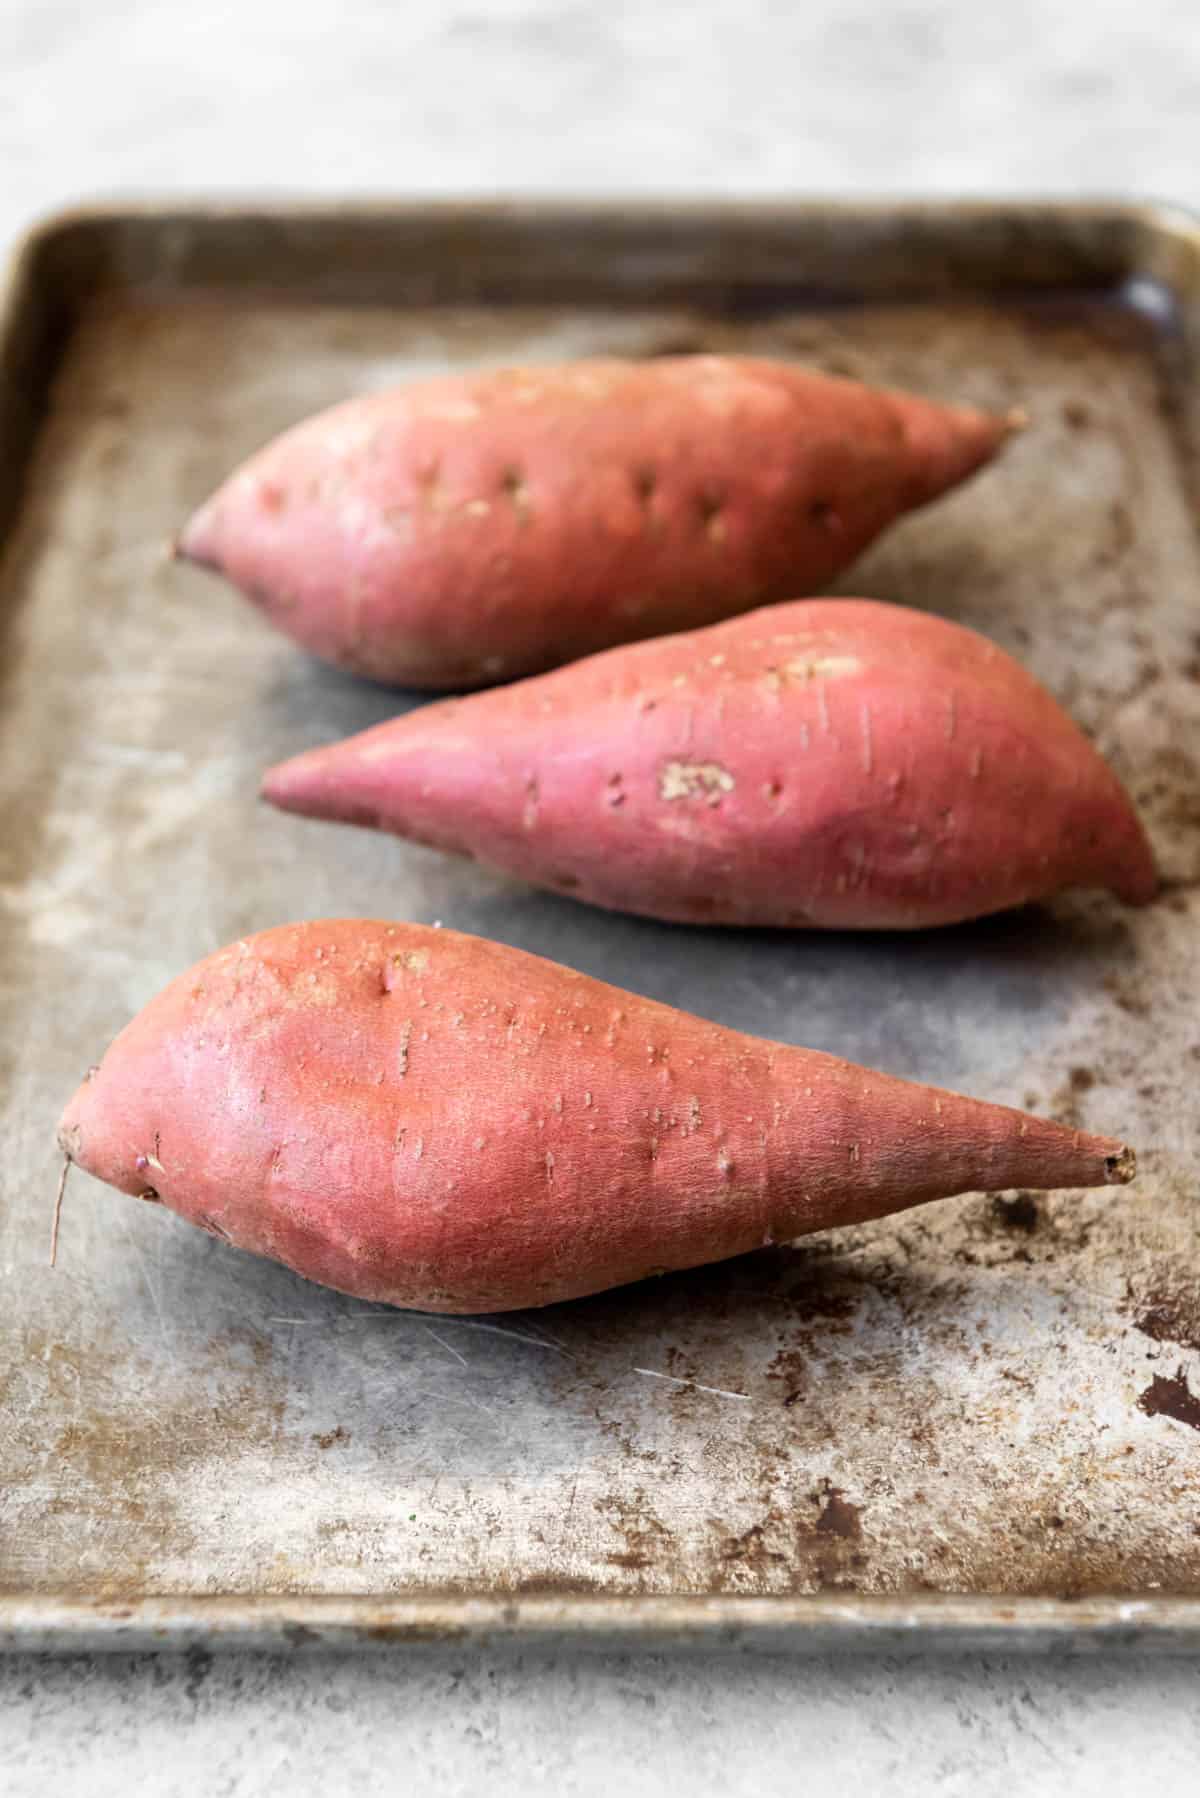 An image of sweet potatoes in their skins on a pan for roasting in the oven.